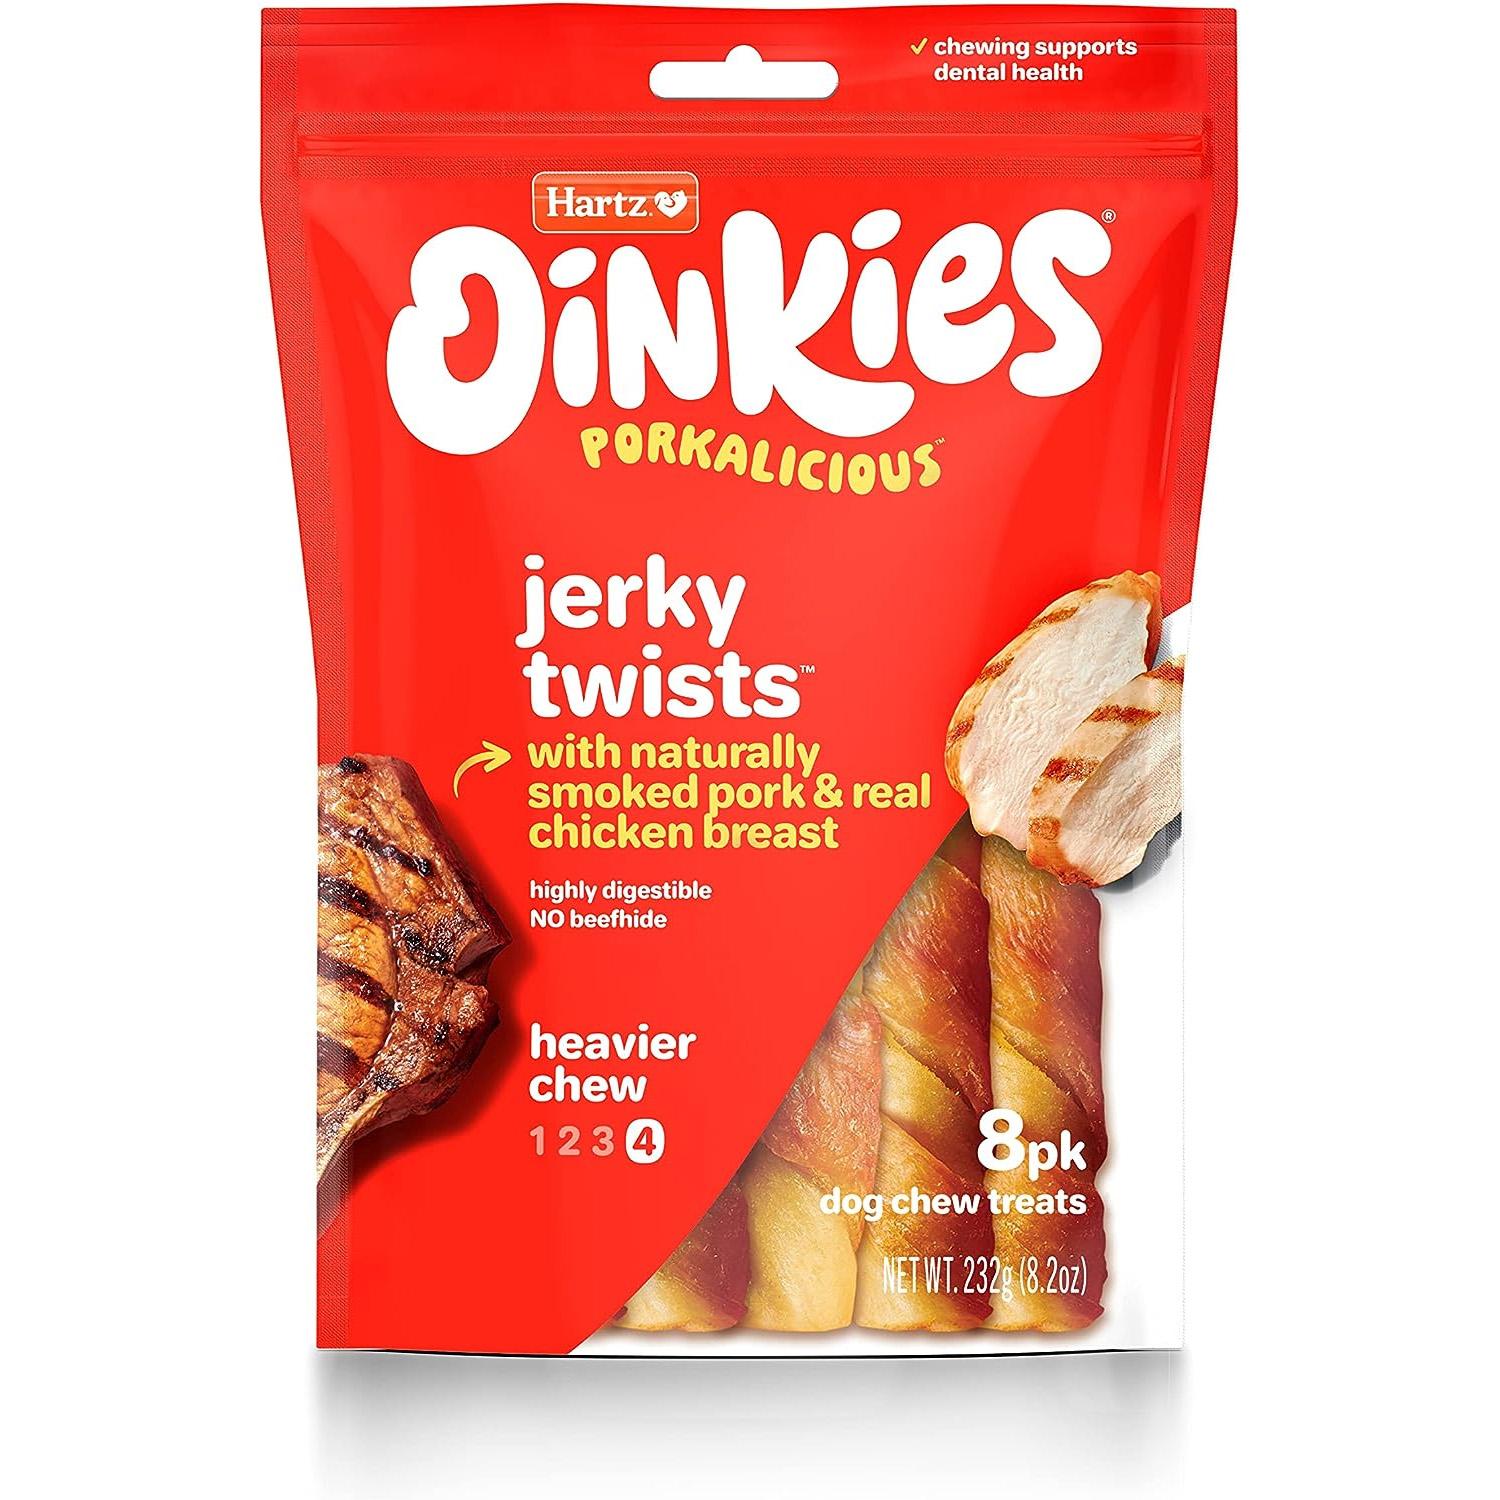 Porkalicious Smoked Pig Skin Chicken Jerky Twists Dog Treats for $5.45